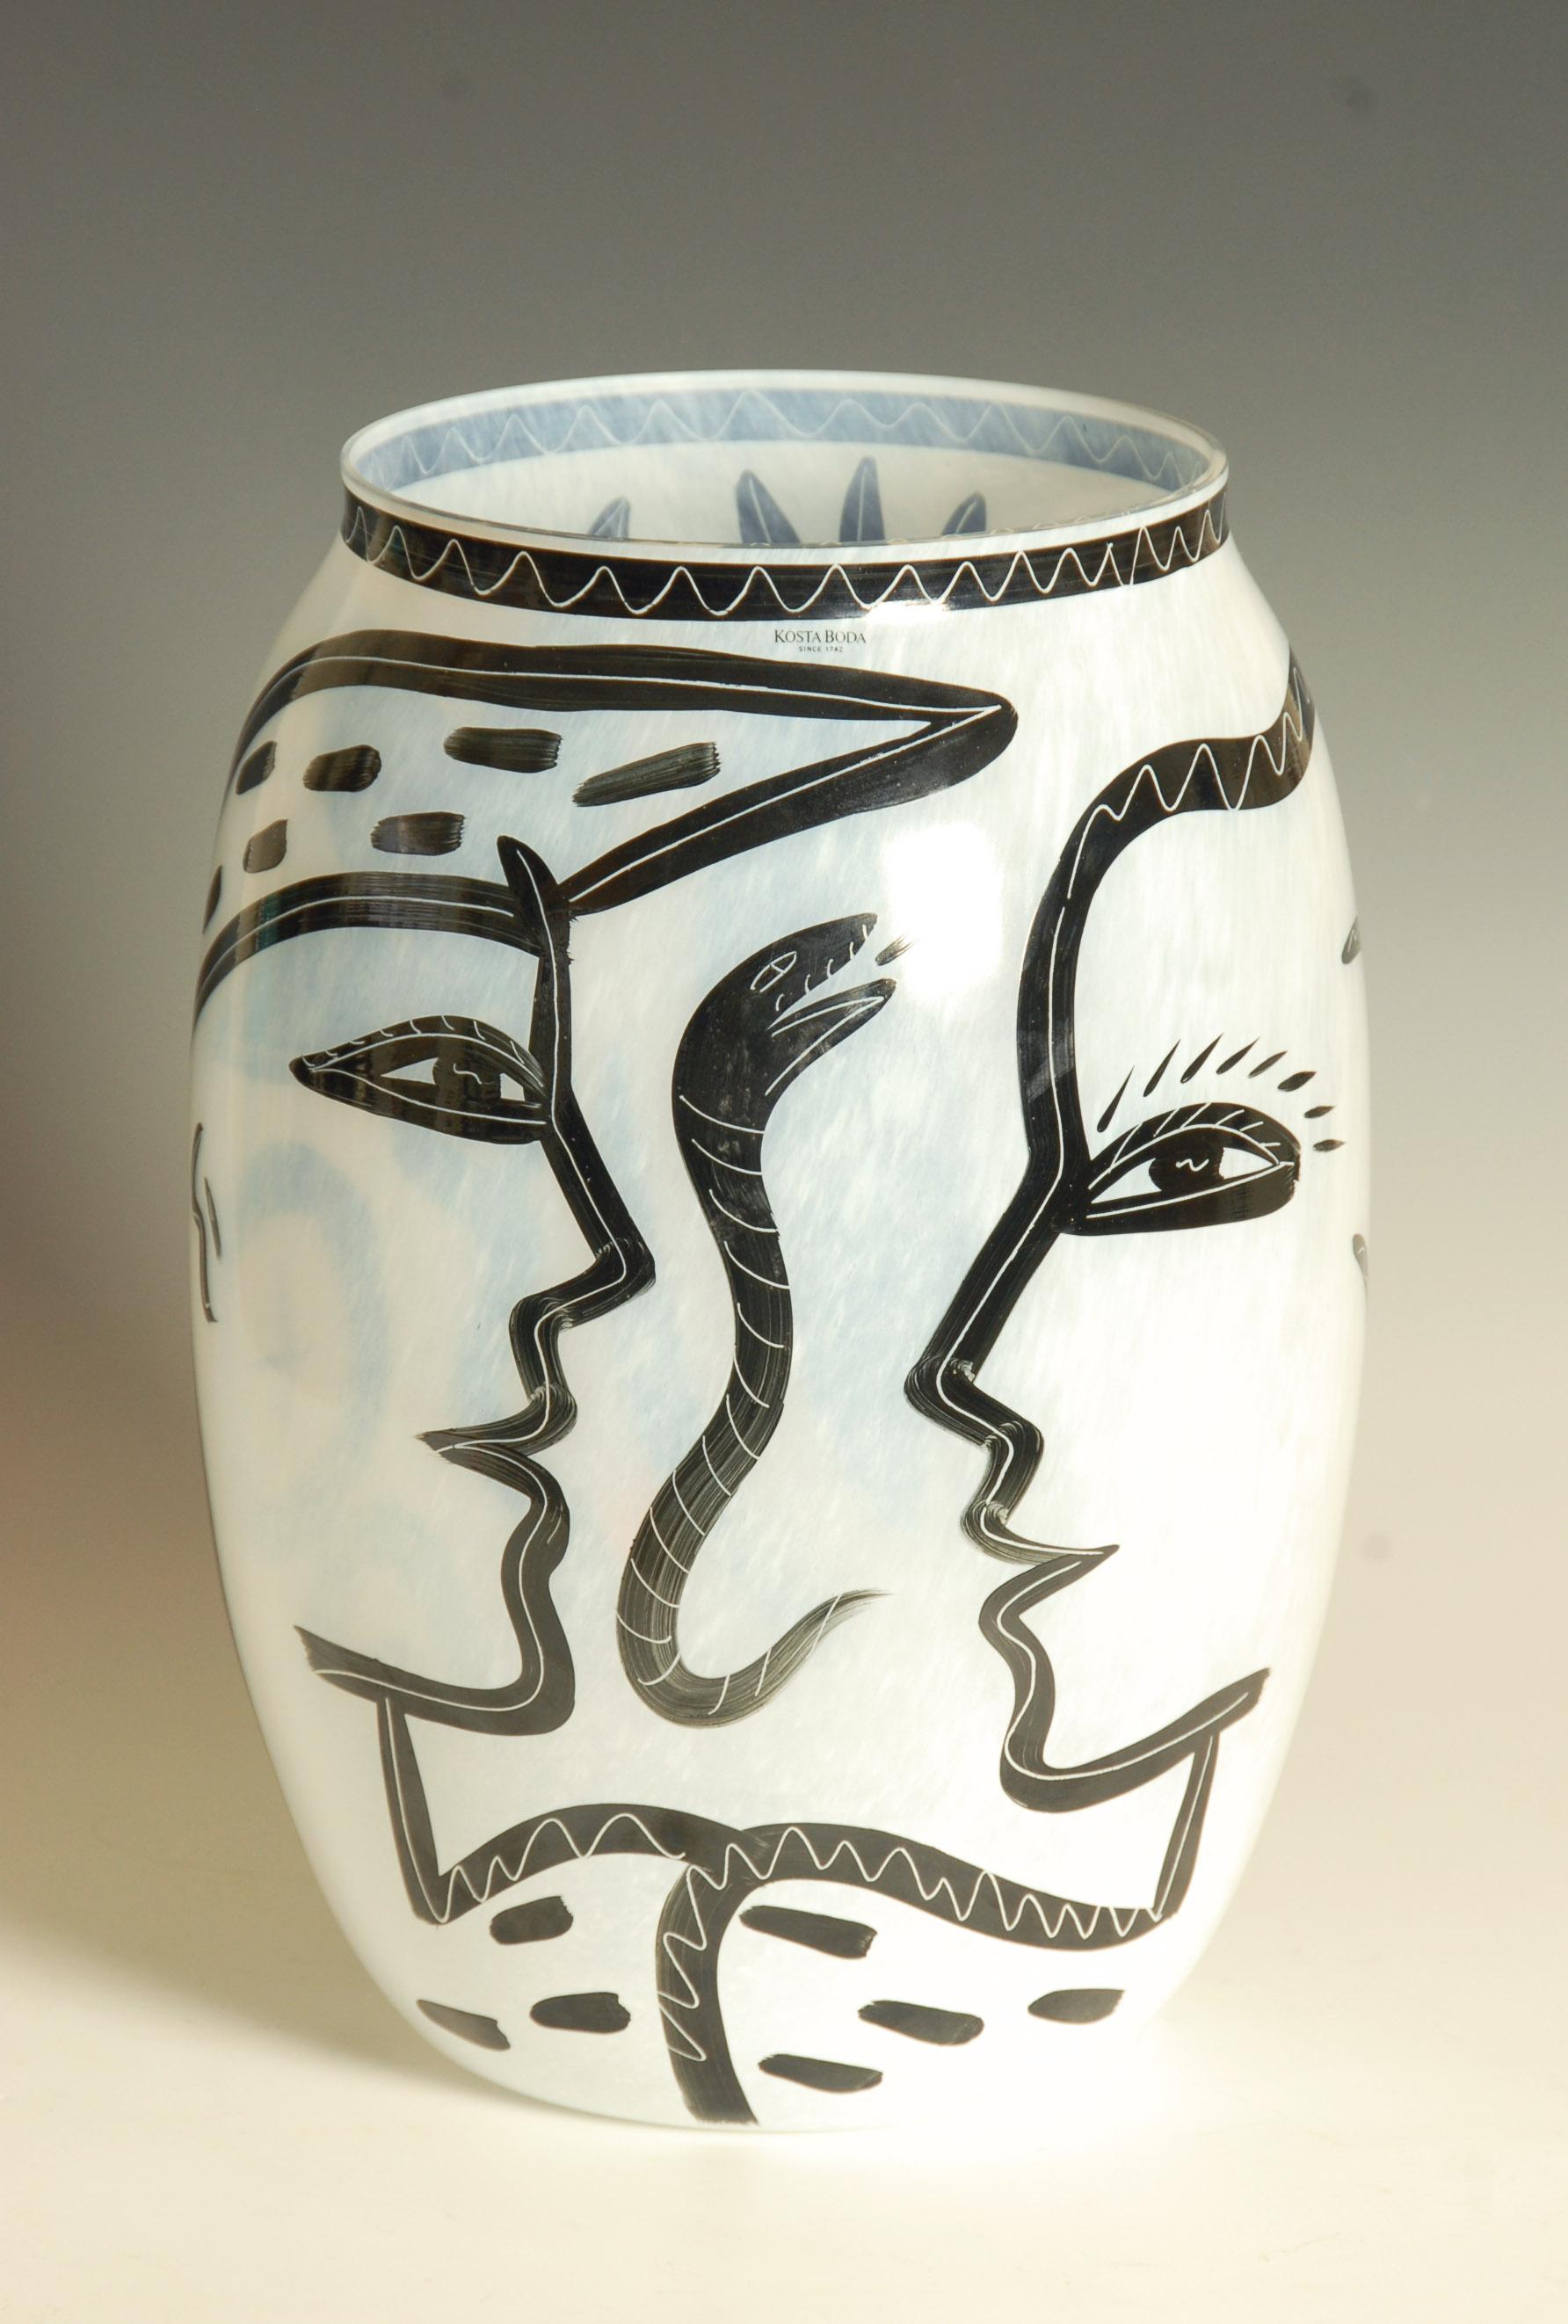 Large hand-painted Kosta Boda Caramba vase by Ulrica Hydman-Vallien.

Signed at side and also signed with number that is etched into the bottom of the vase.

Price includes free shipping.